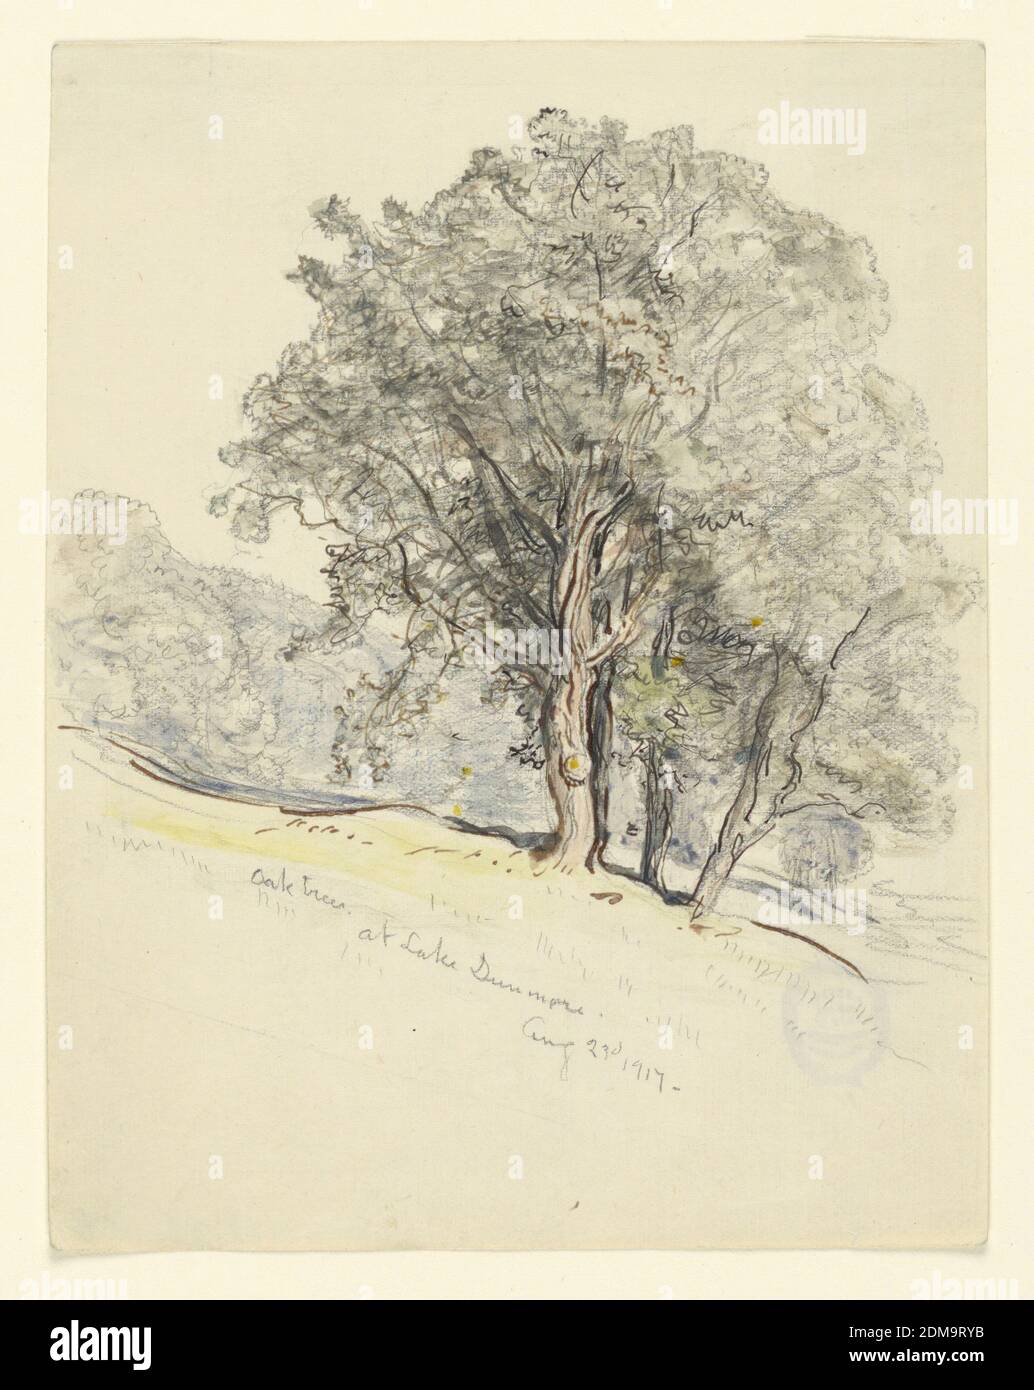 https://c8.alamy.com/comp/2DM9RYB/study-of-oak-trees-at-lake-dunmore-vermont-samuel-colman-american-18321920-pen-and-black-ink-brush-and-watercolor-colored-pencil-on-paper-vertical-rectangle-a-group-of-oaks-is-shown-in-the-foreground-standing-at-a-hillside-with-a-meadow-a-wood-is-in-the-left-background-high-bottom-margin-usa-august-23-1917-landscapes-drawing-2DM9RYB.jpg